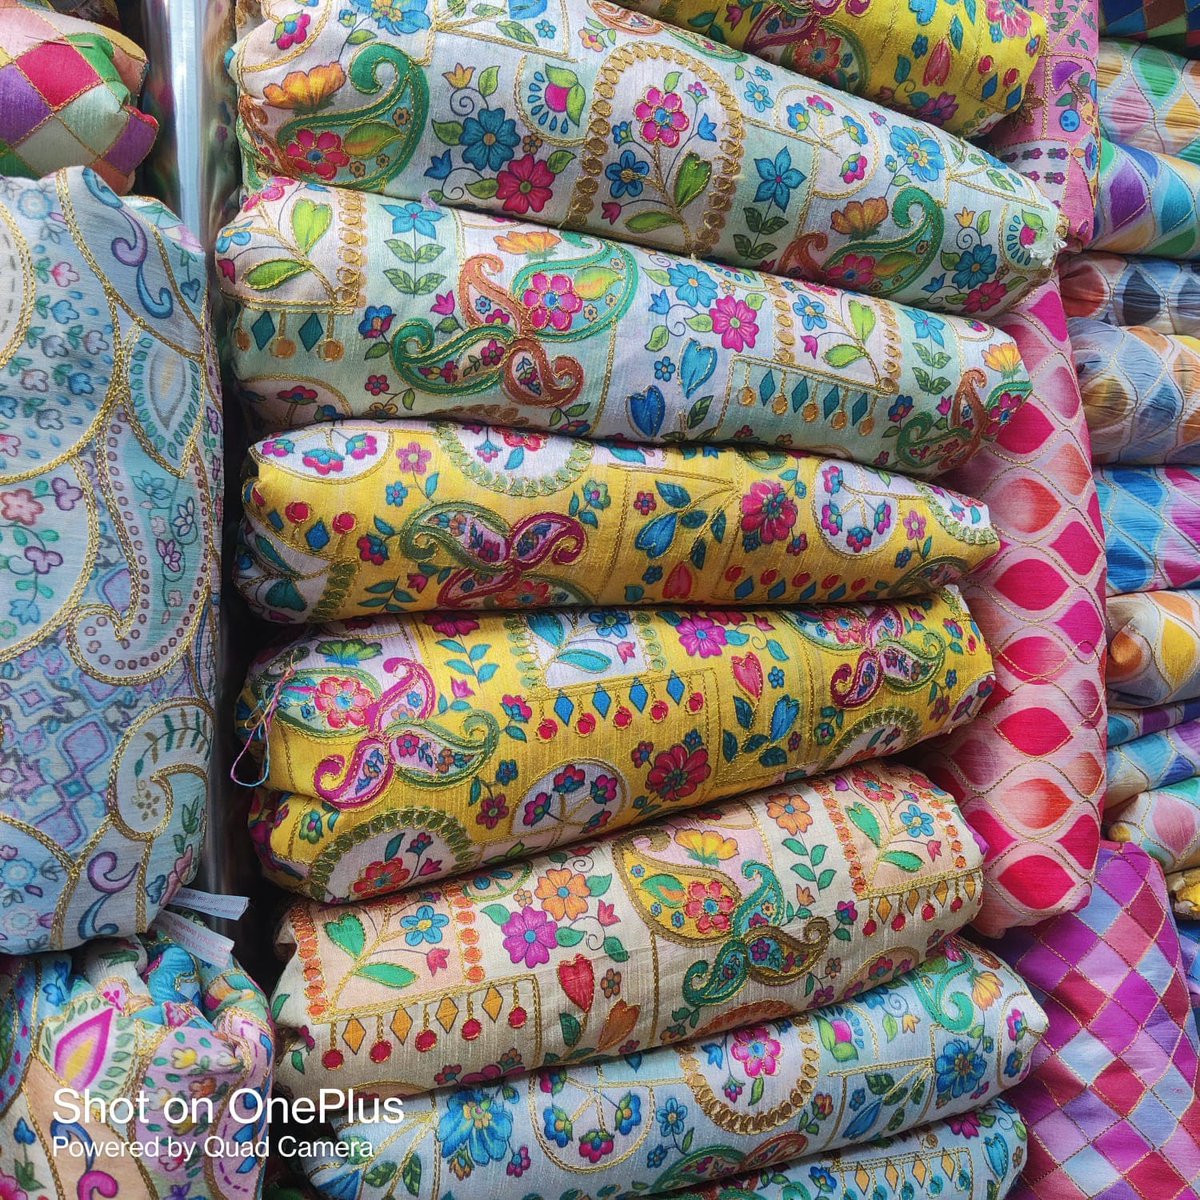 Excited to share the latest addition to my #etsy shop: Fabric, Fabric Material, Cotton Fabric, Silk Fabric, Chanderi Fabric, Georgette Fabric,linen fabric,velvet Fabric, Reyon Fabric, organza etsy.me/41bcs3q #jewellerymaking #cottonfabric #georgettefabric #silk